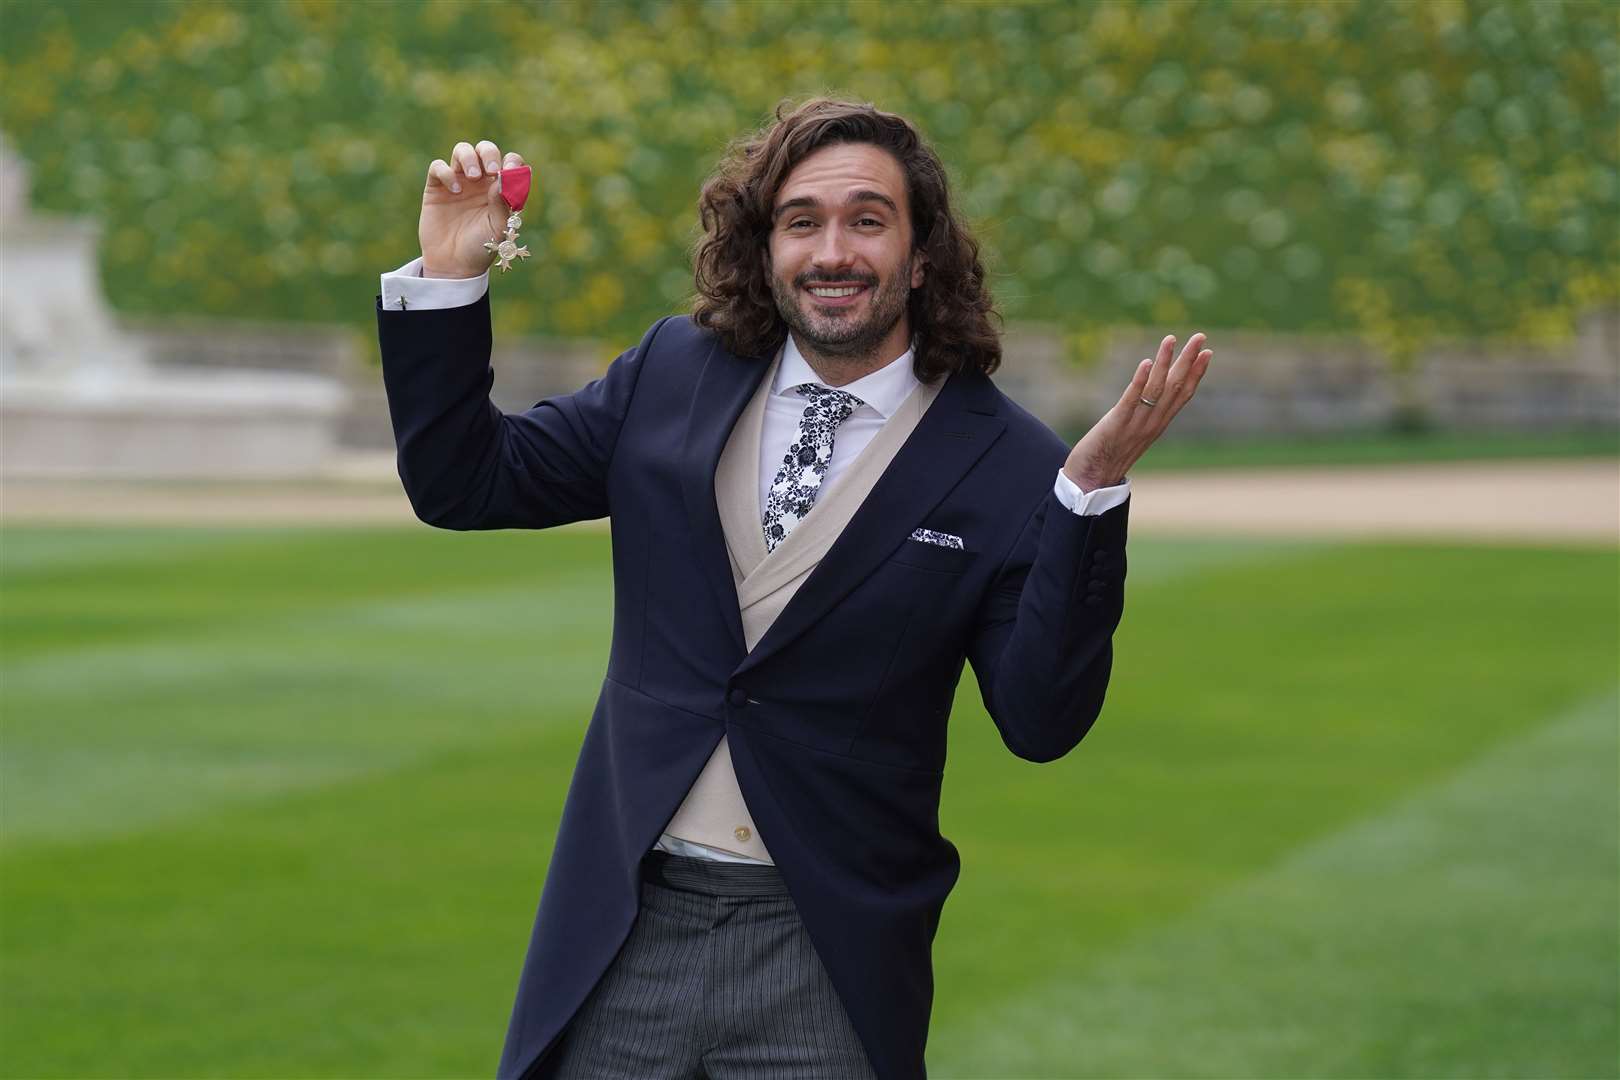 Joe Wicks after receiving his MBE medal from the Prince of Wales (Steve Parsons/PA)